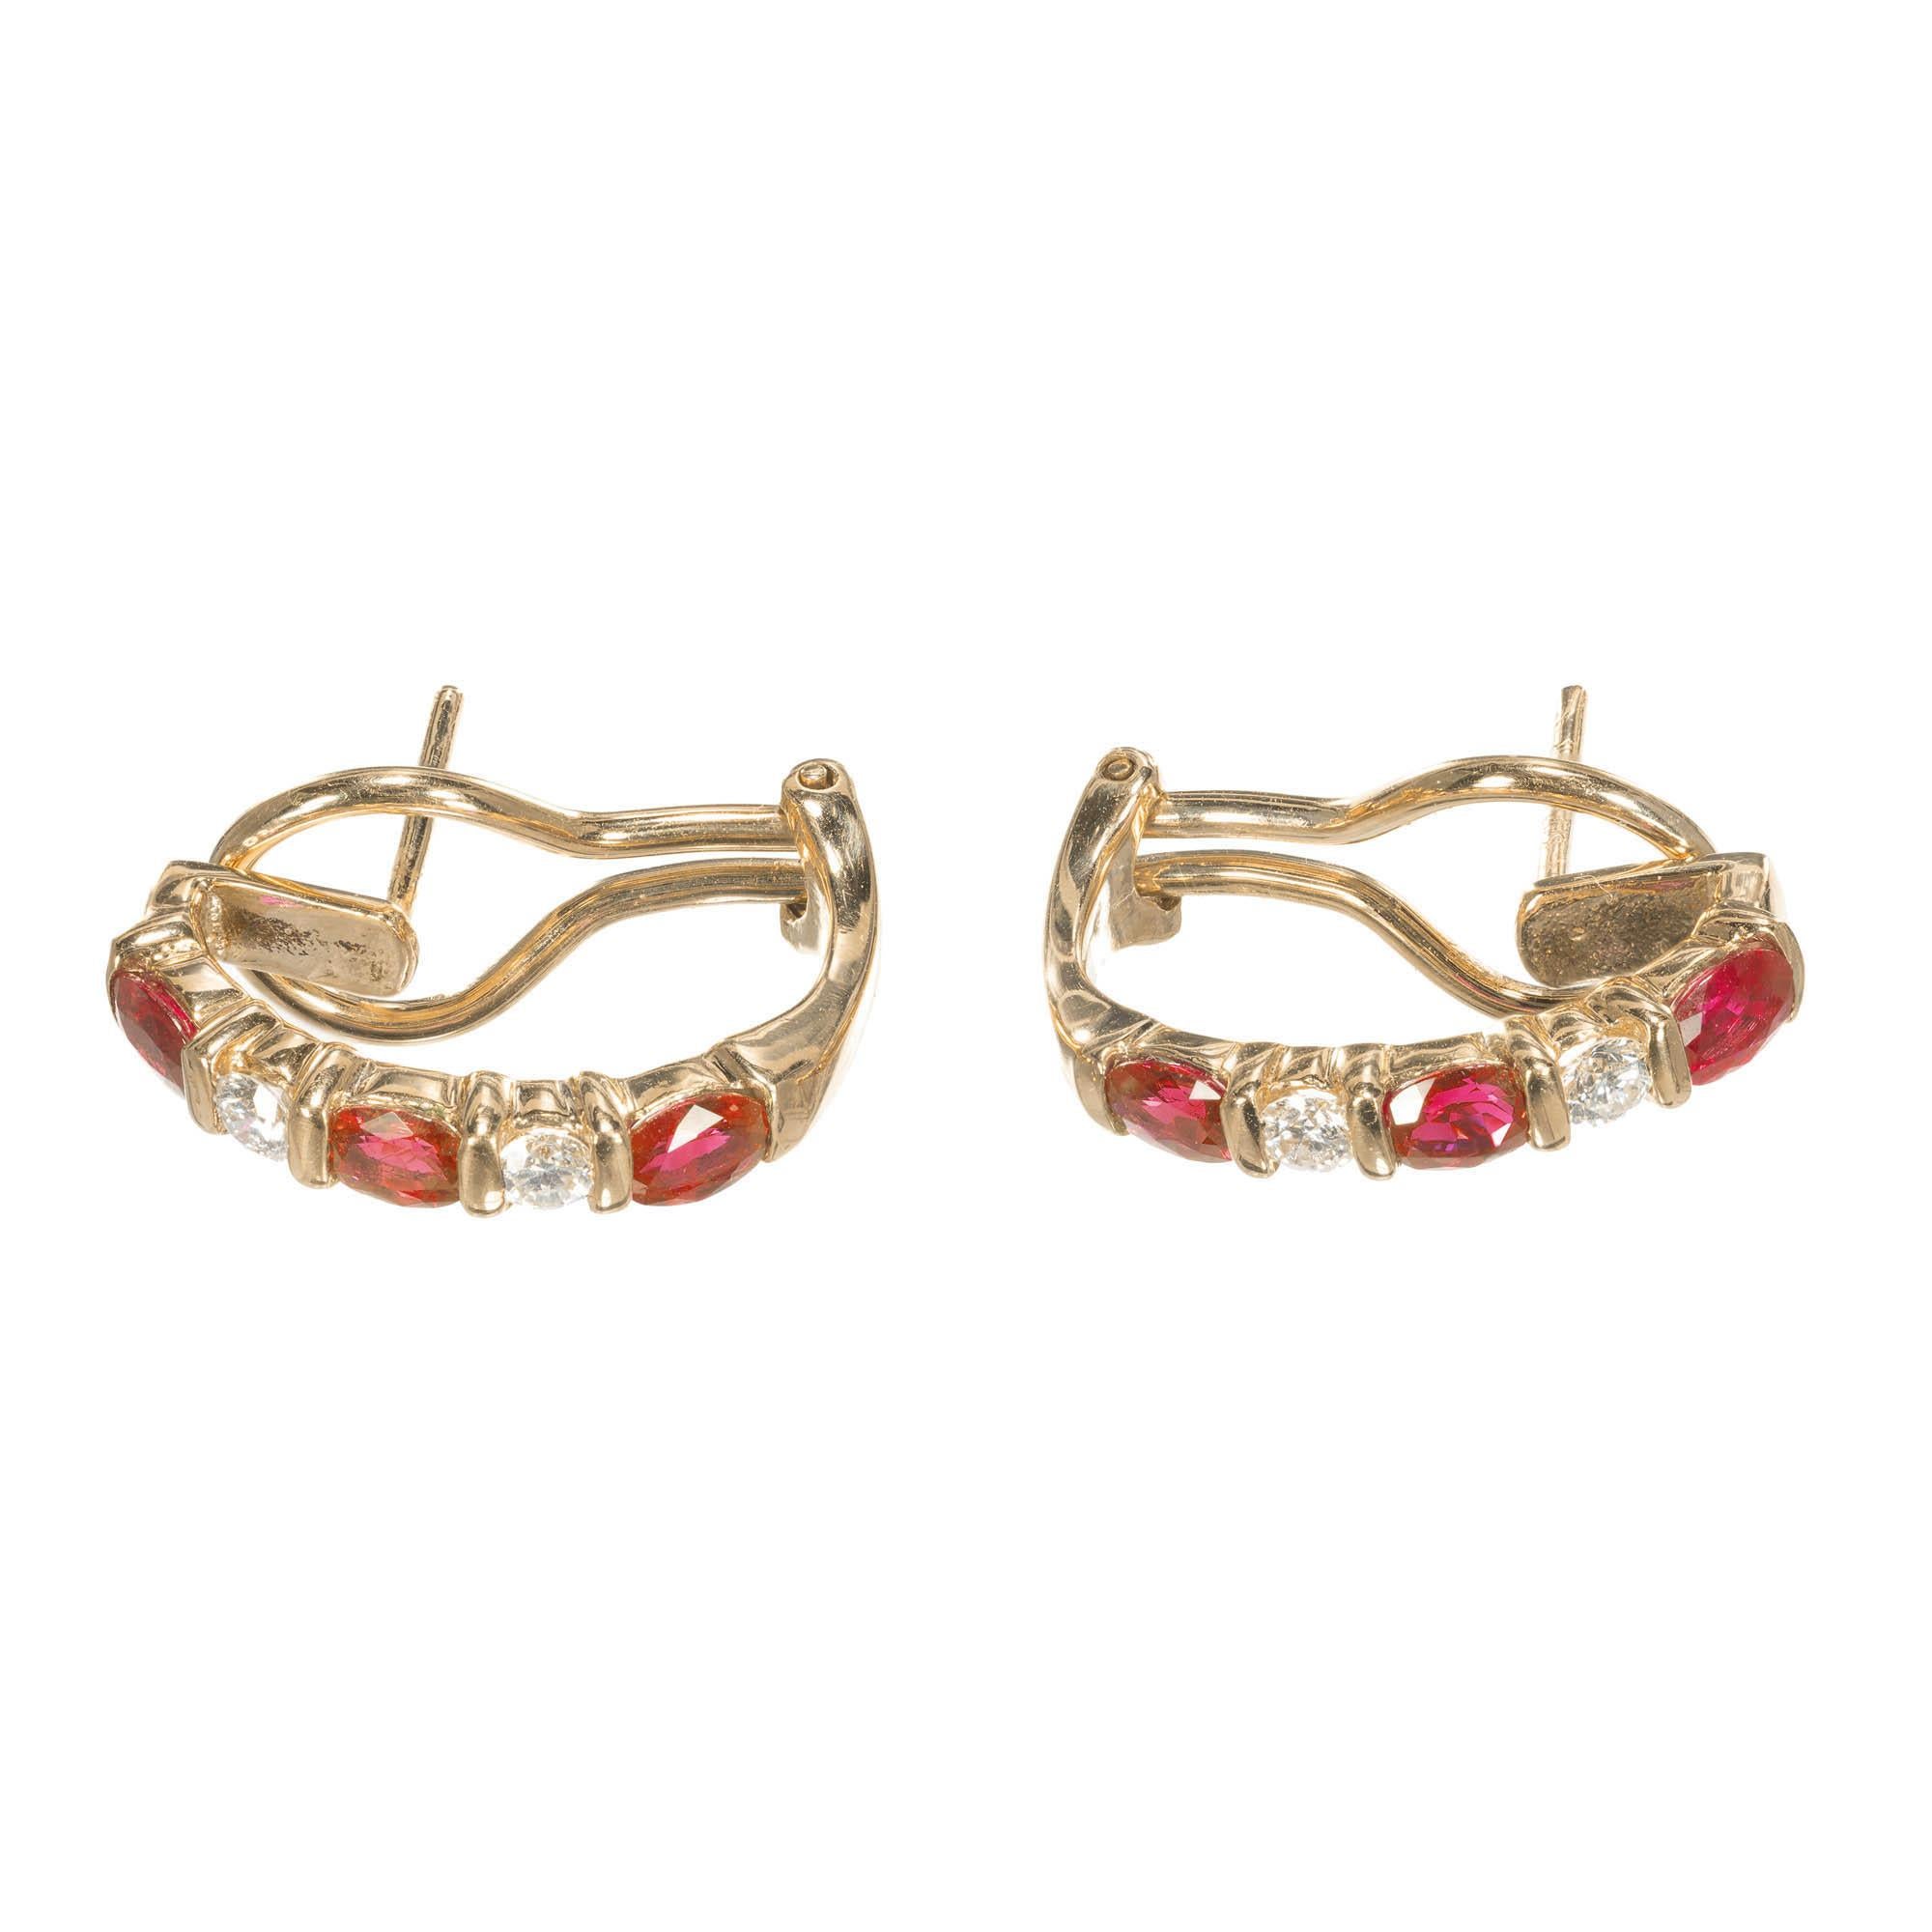 18k yellow gold Ruby and Diamond earrings. Oval shaped Rubies alternating with round brilliant cut Diamonds in 18k yellow gold channel set design setting.

6 oval red Rubies, approx. total weight .90cts, 3.2 x 3.1 x 1.9mm, GIA certificate